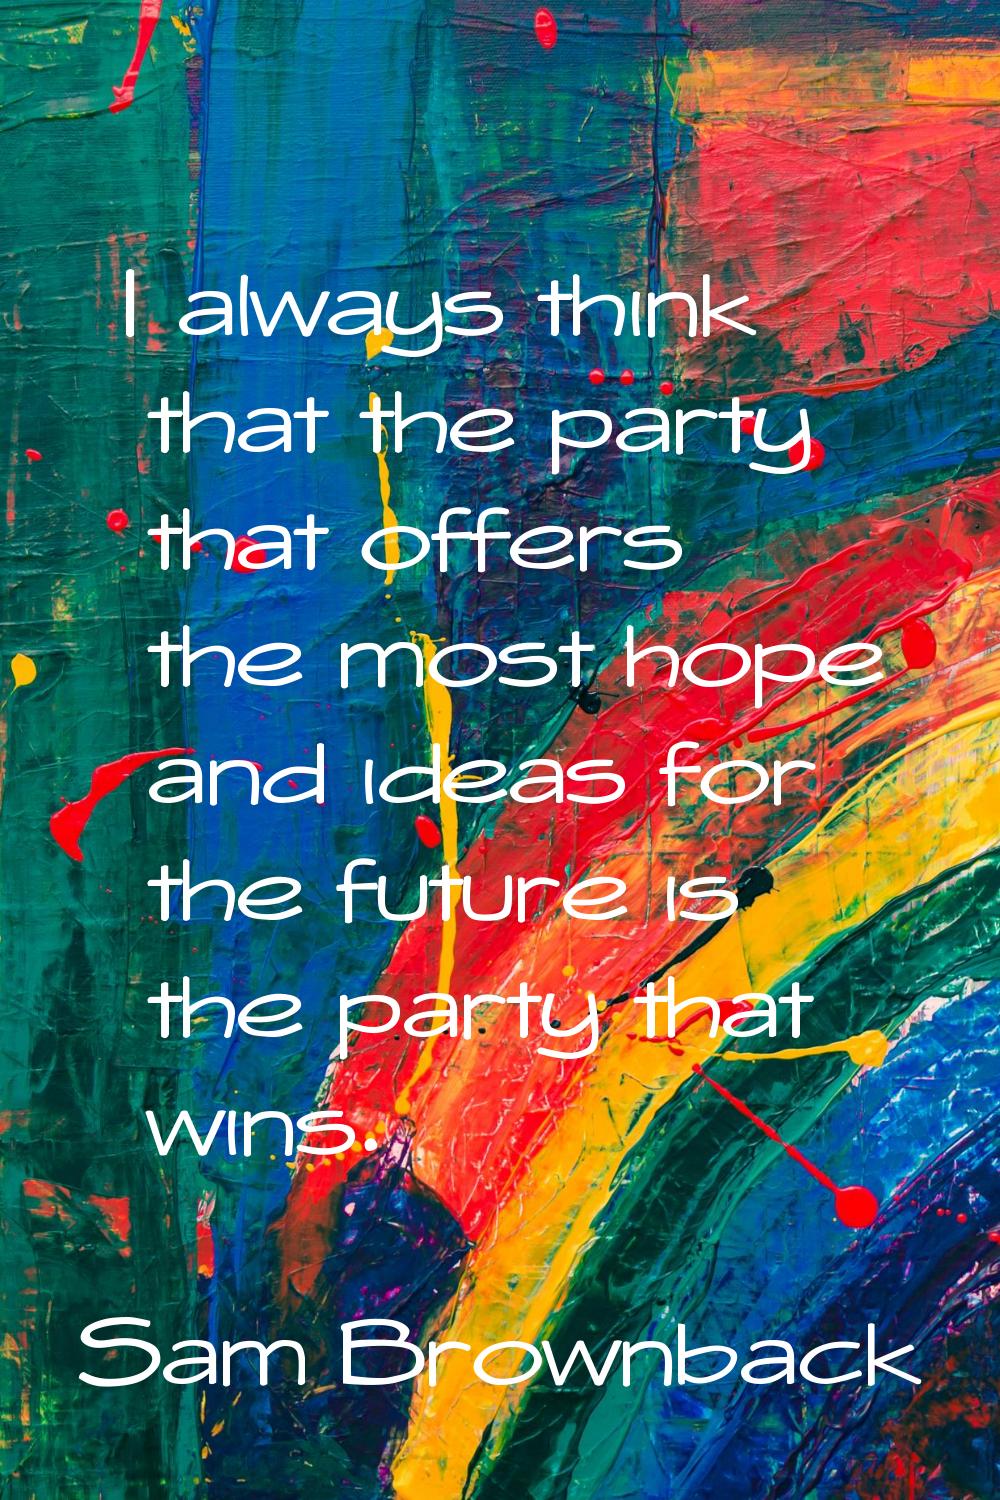 I always think that the party that offers the most hope and ideas for the future is the party that 